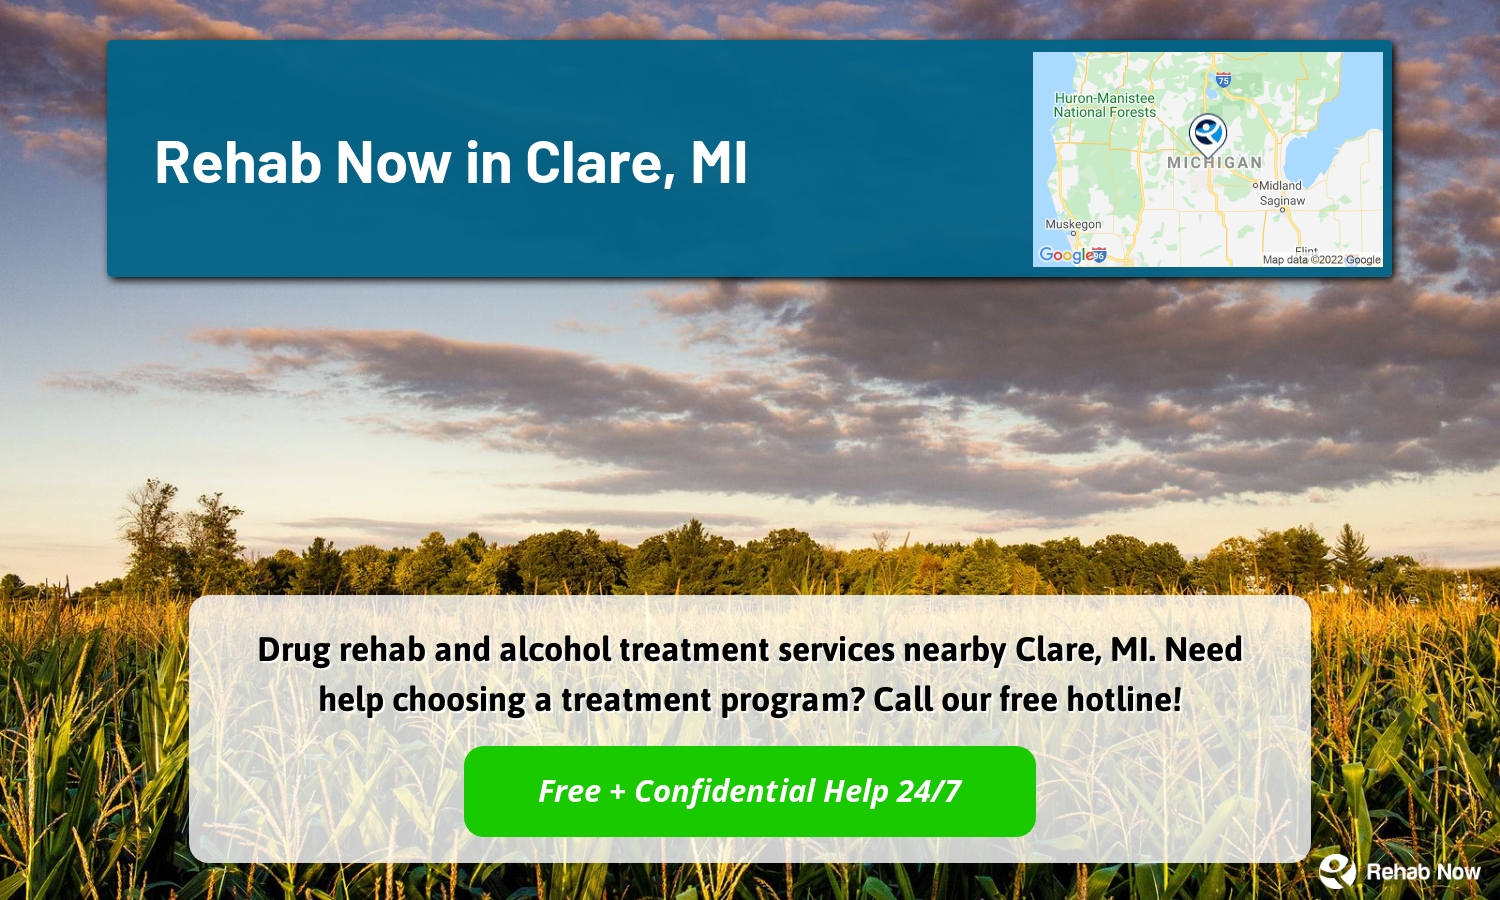 Drug rehab and alcohol treatment services nearby Clare, MI. Need help choosing a treatment program? Call our free hotline!